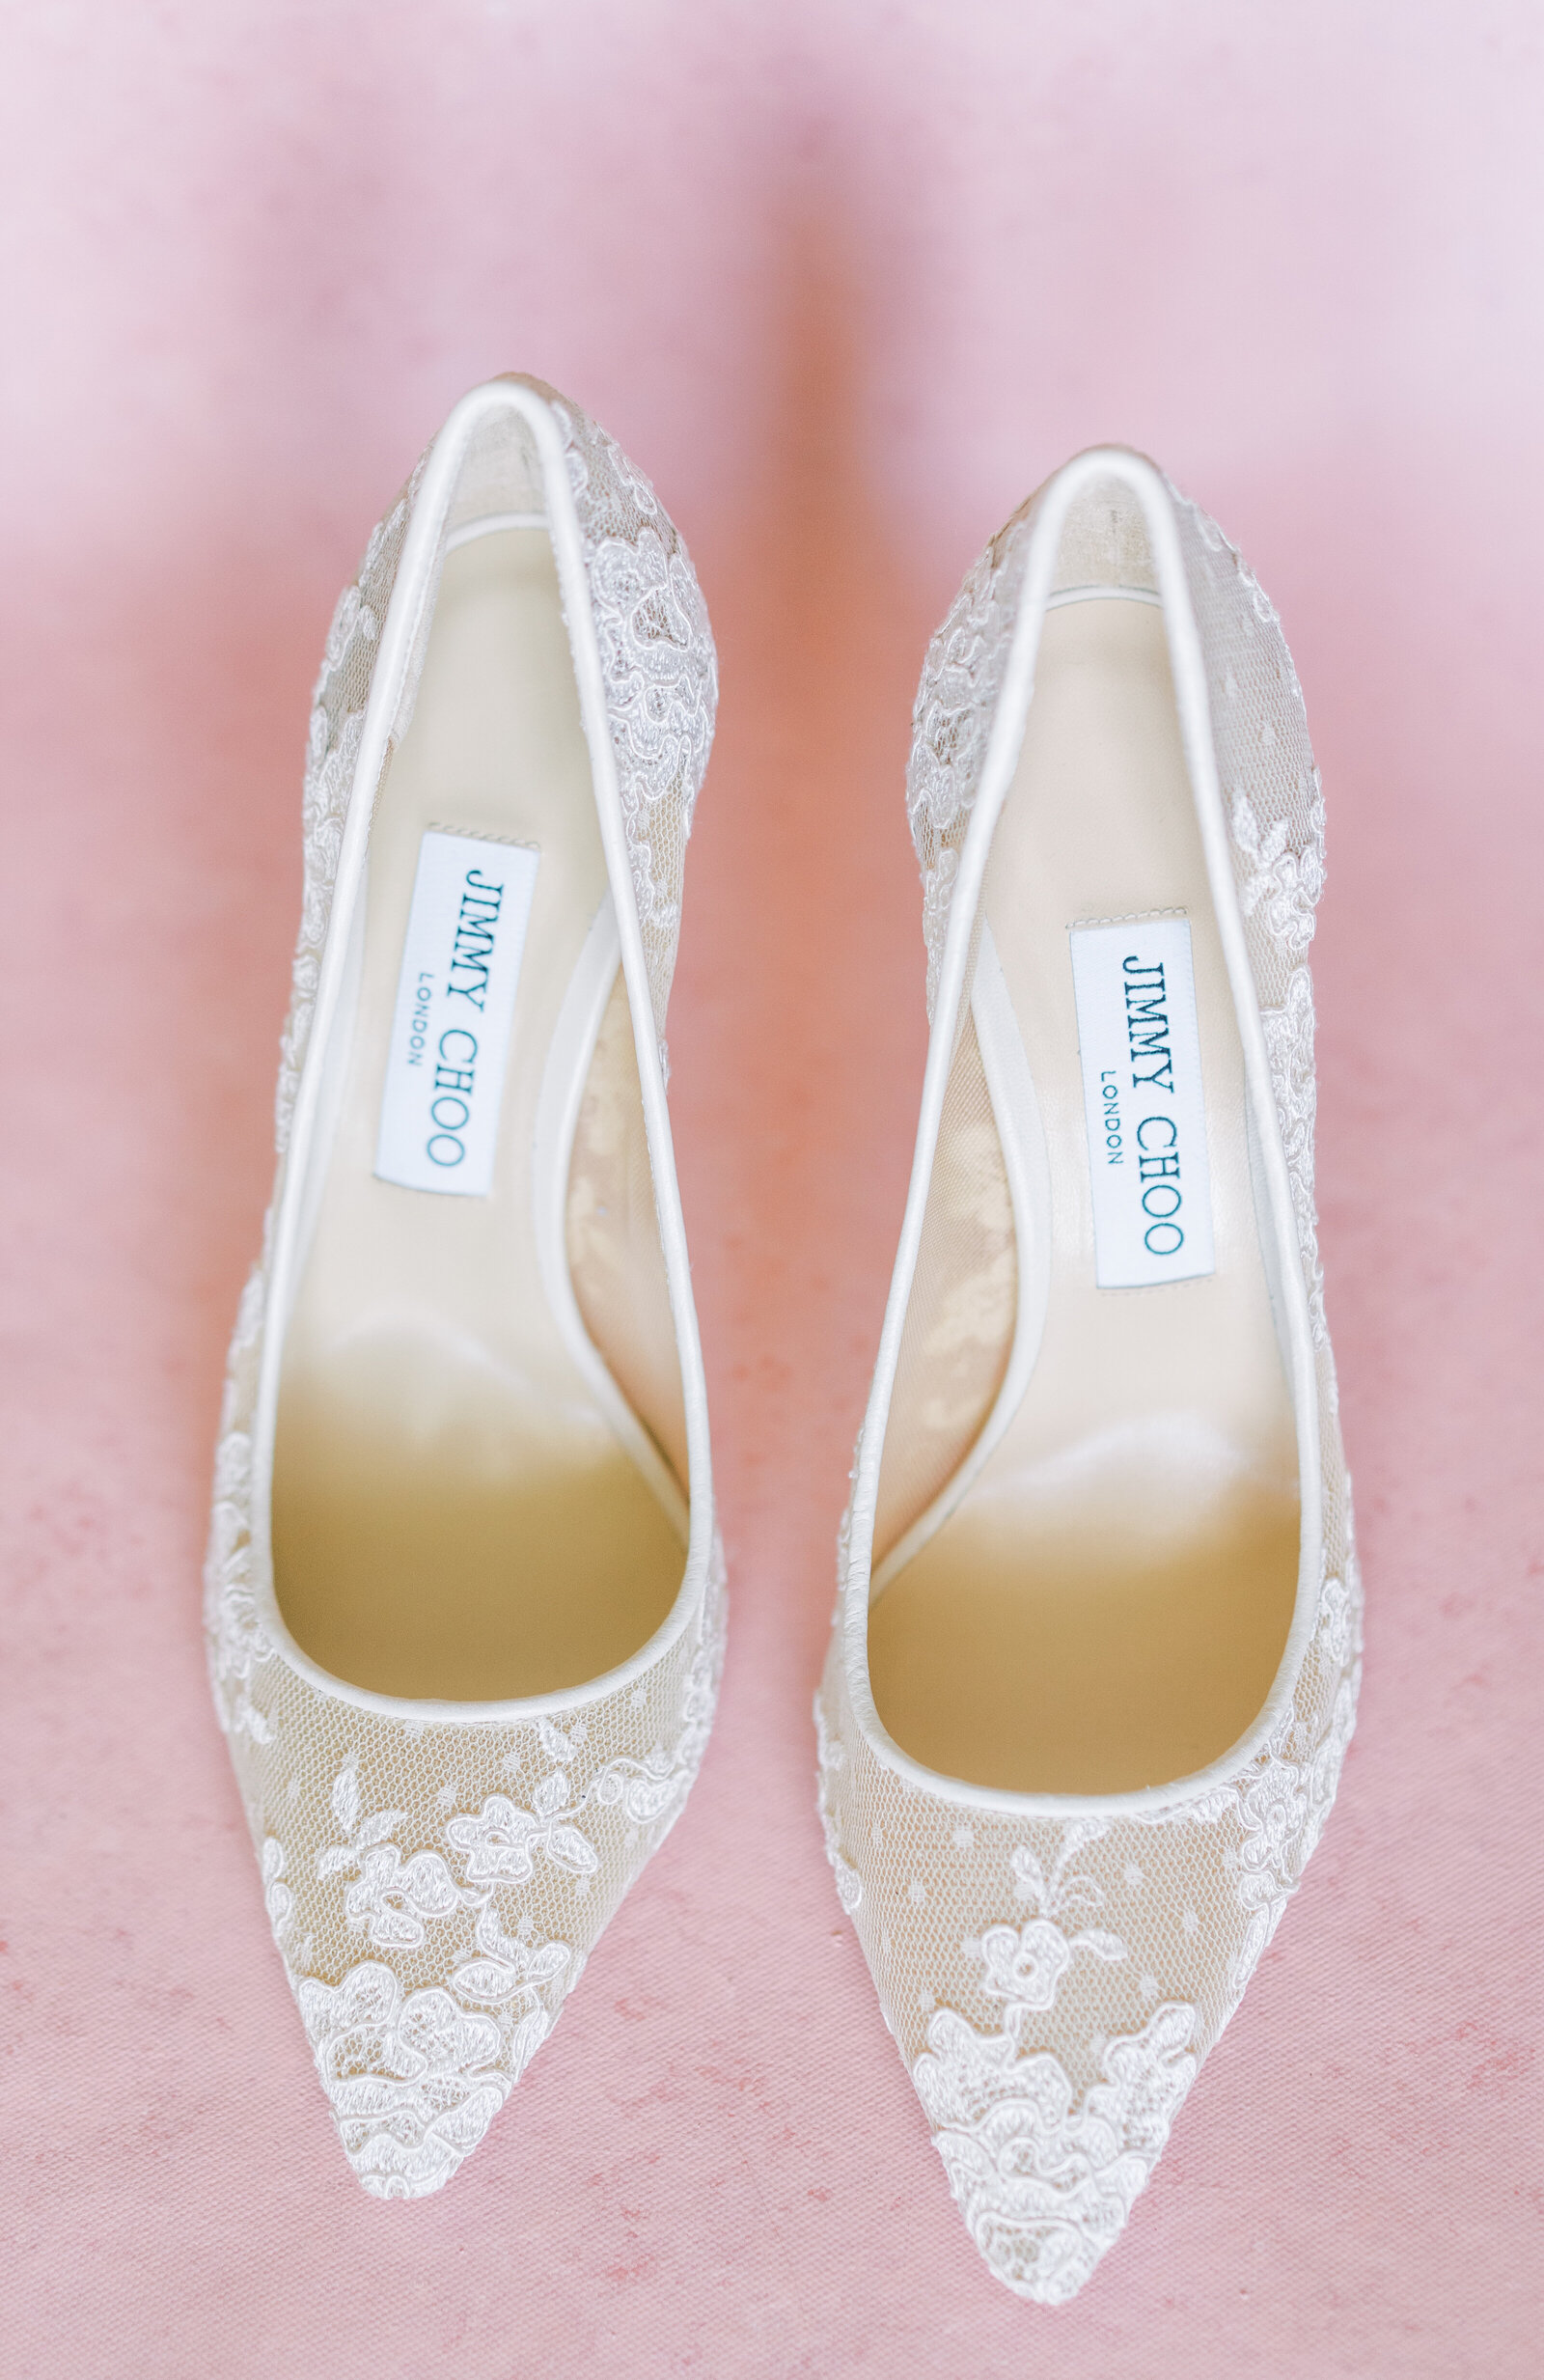 Portrait of white lace Jimmy Choo wedding slippers atop a pink surface